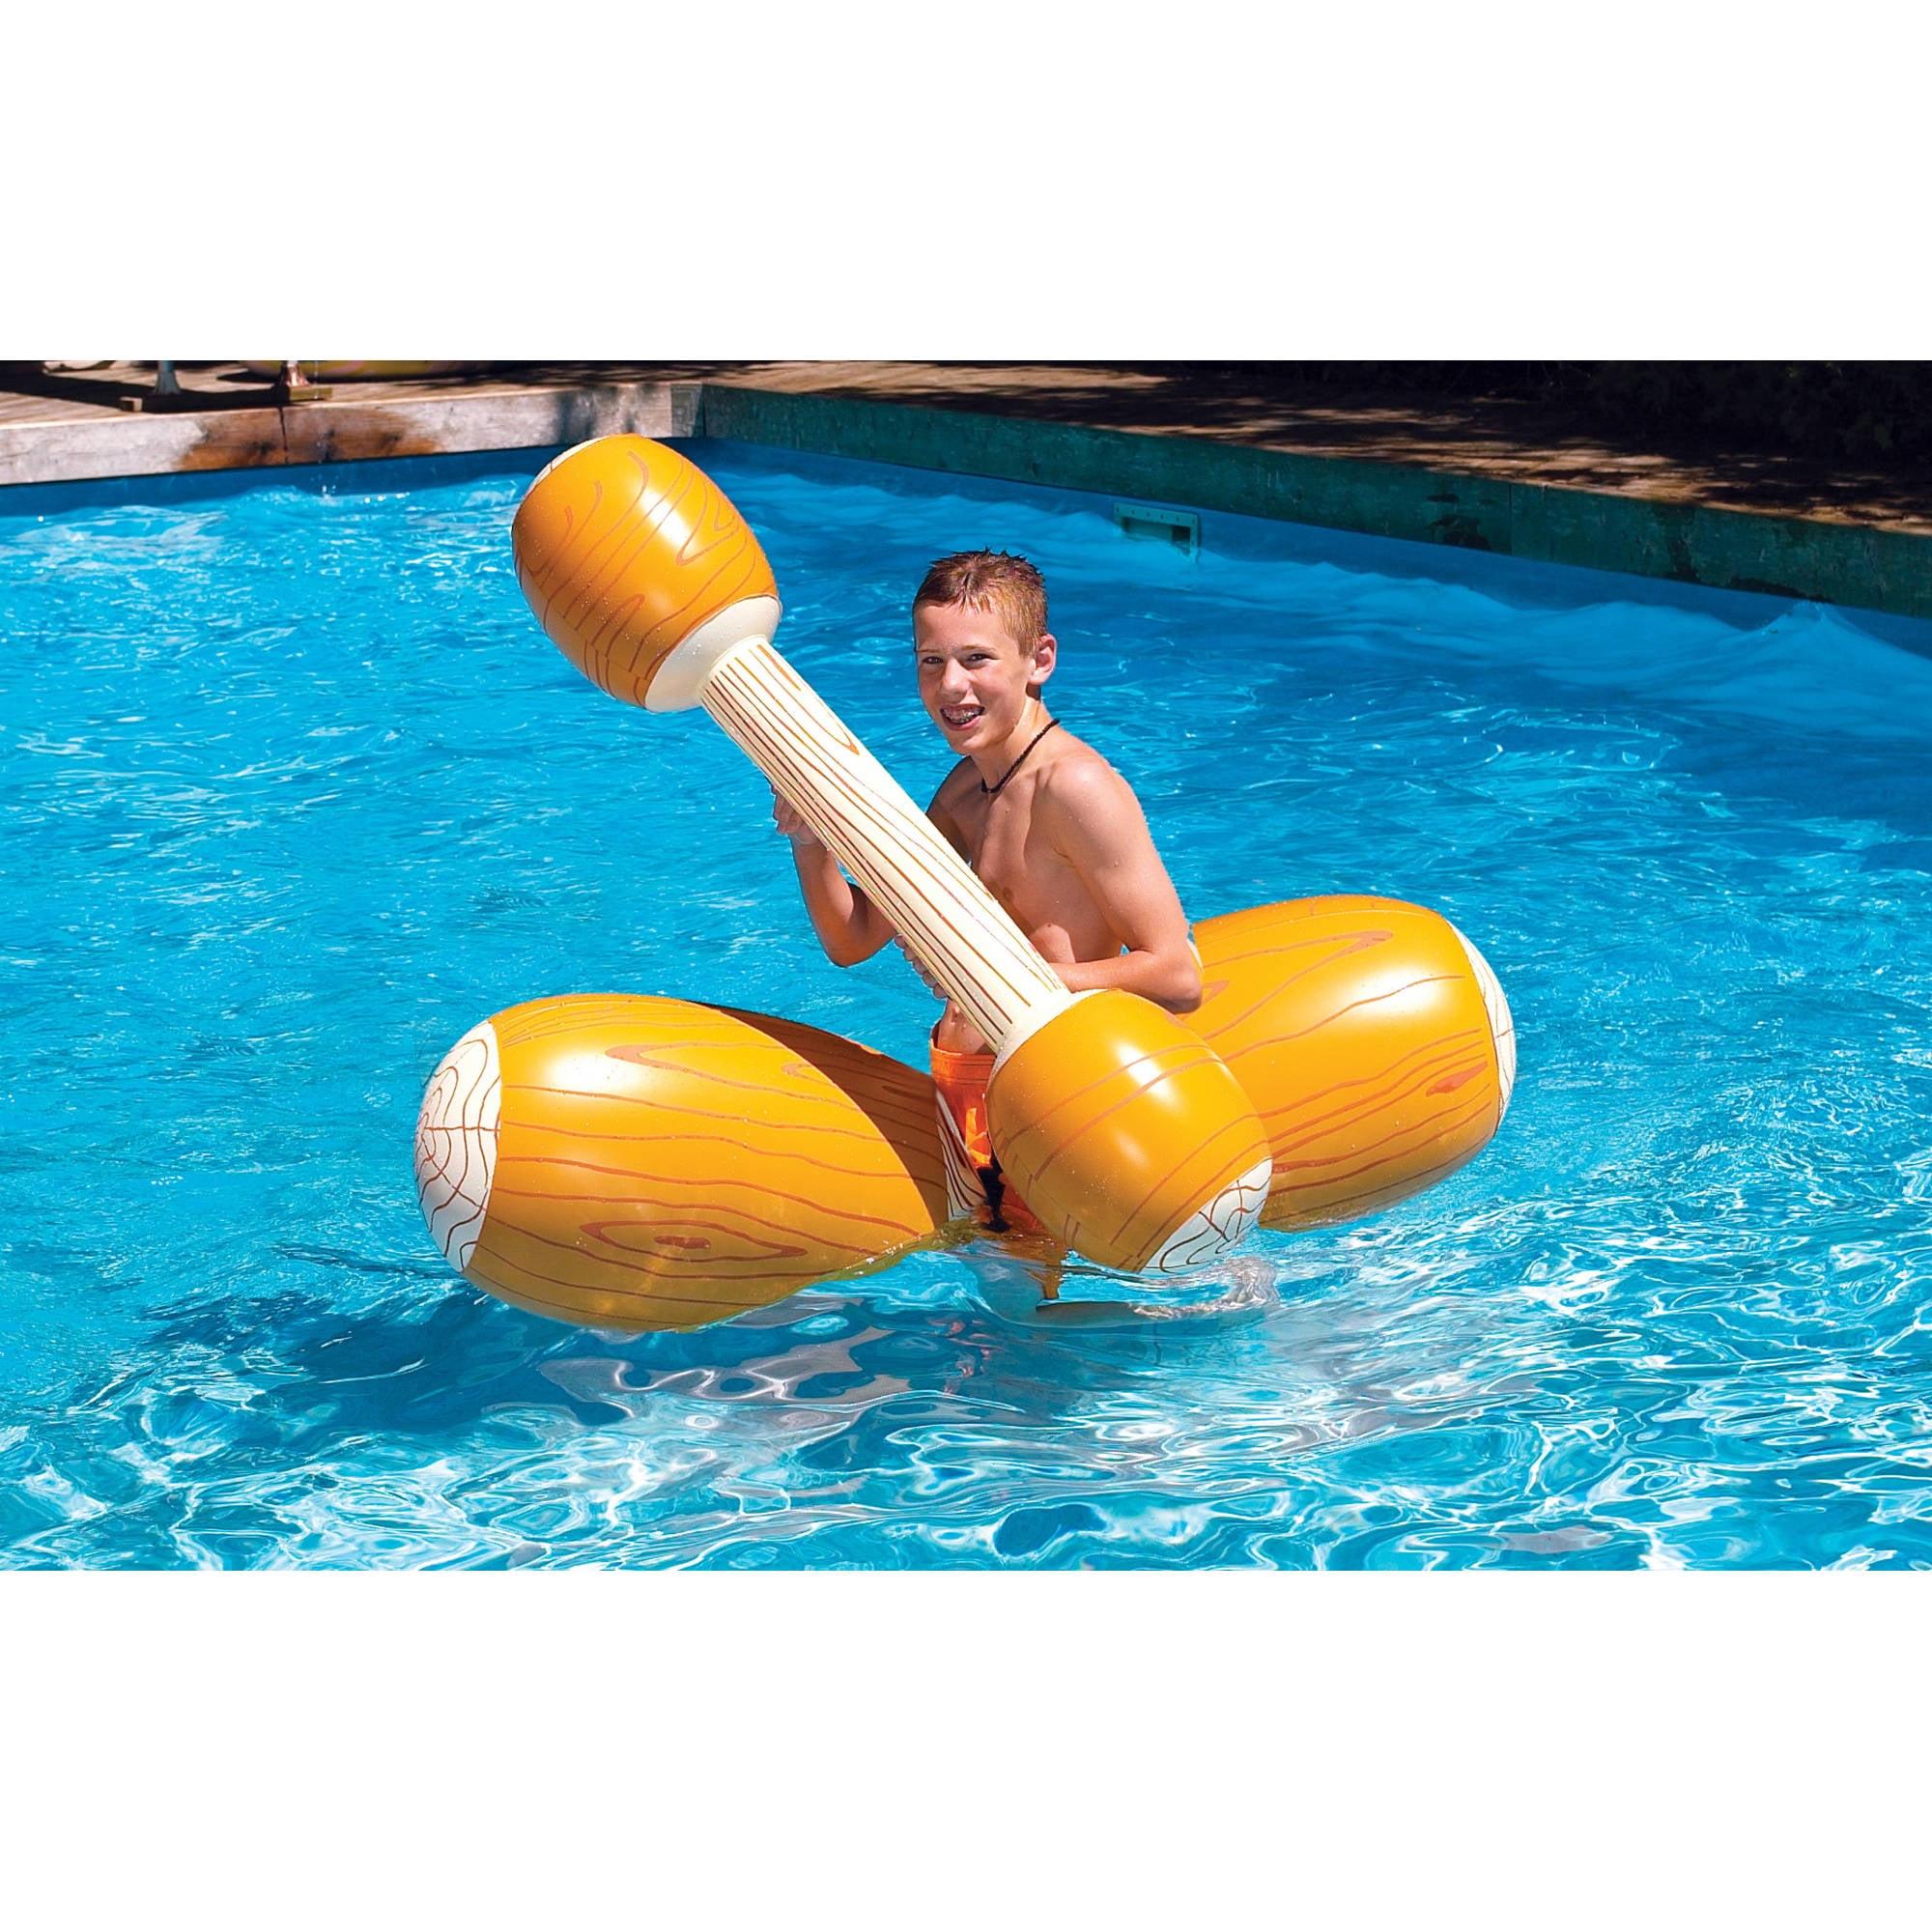 2 Pairs Fun Summer Log Flume Joust Swimming Pool Inflatable Float Game Set Toys 